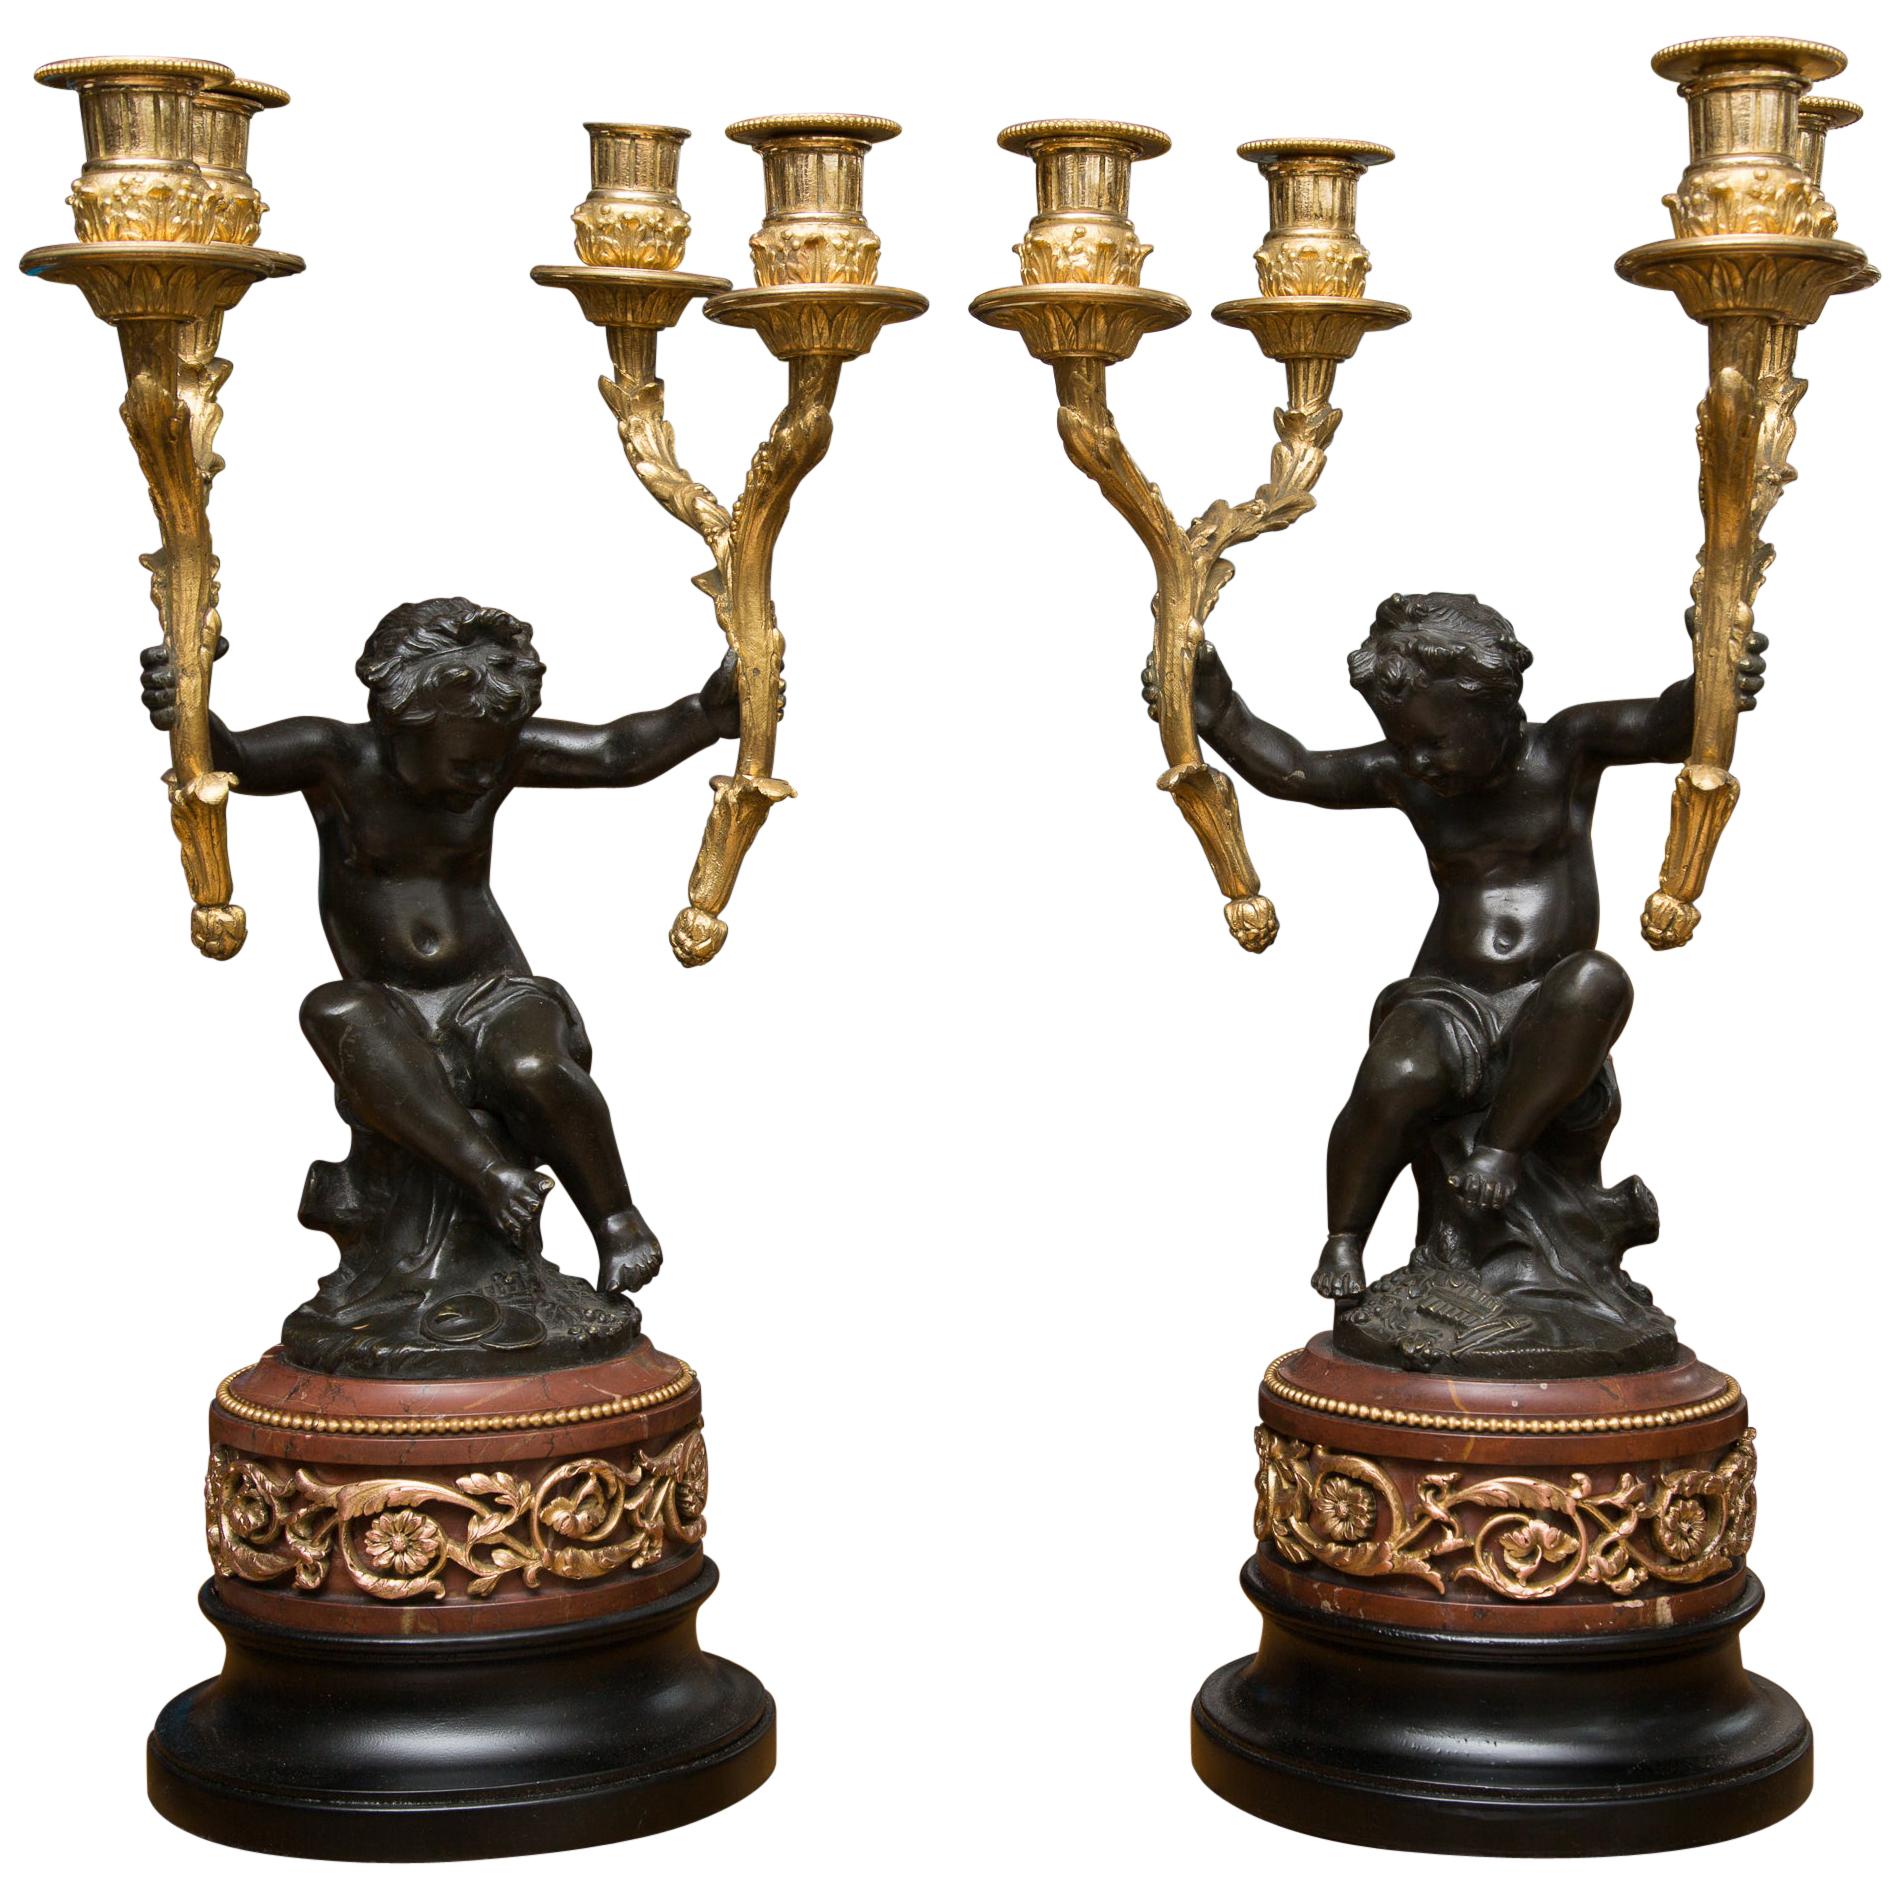 Pair of 19th Century French Gilt and Patinated Bronze Cherubs as Candelabra For Sale